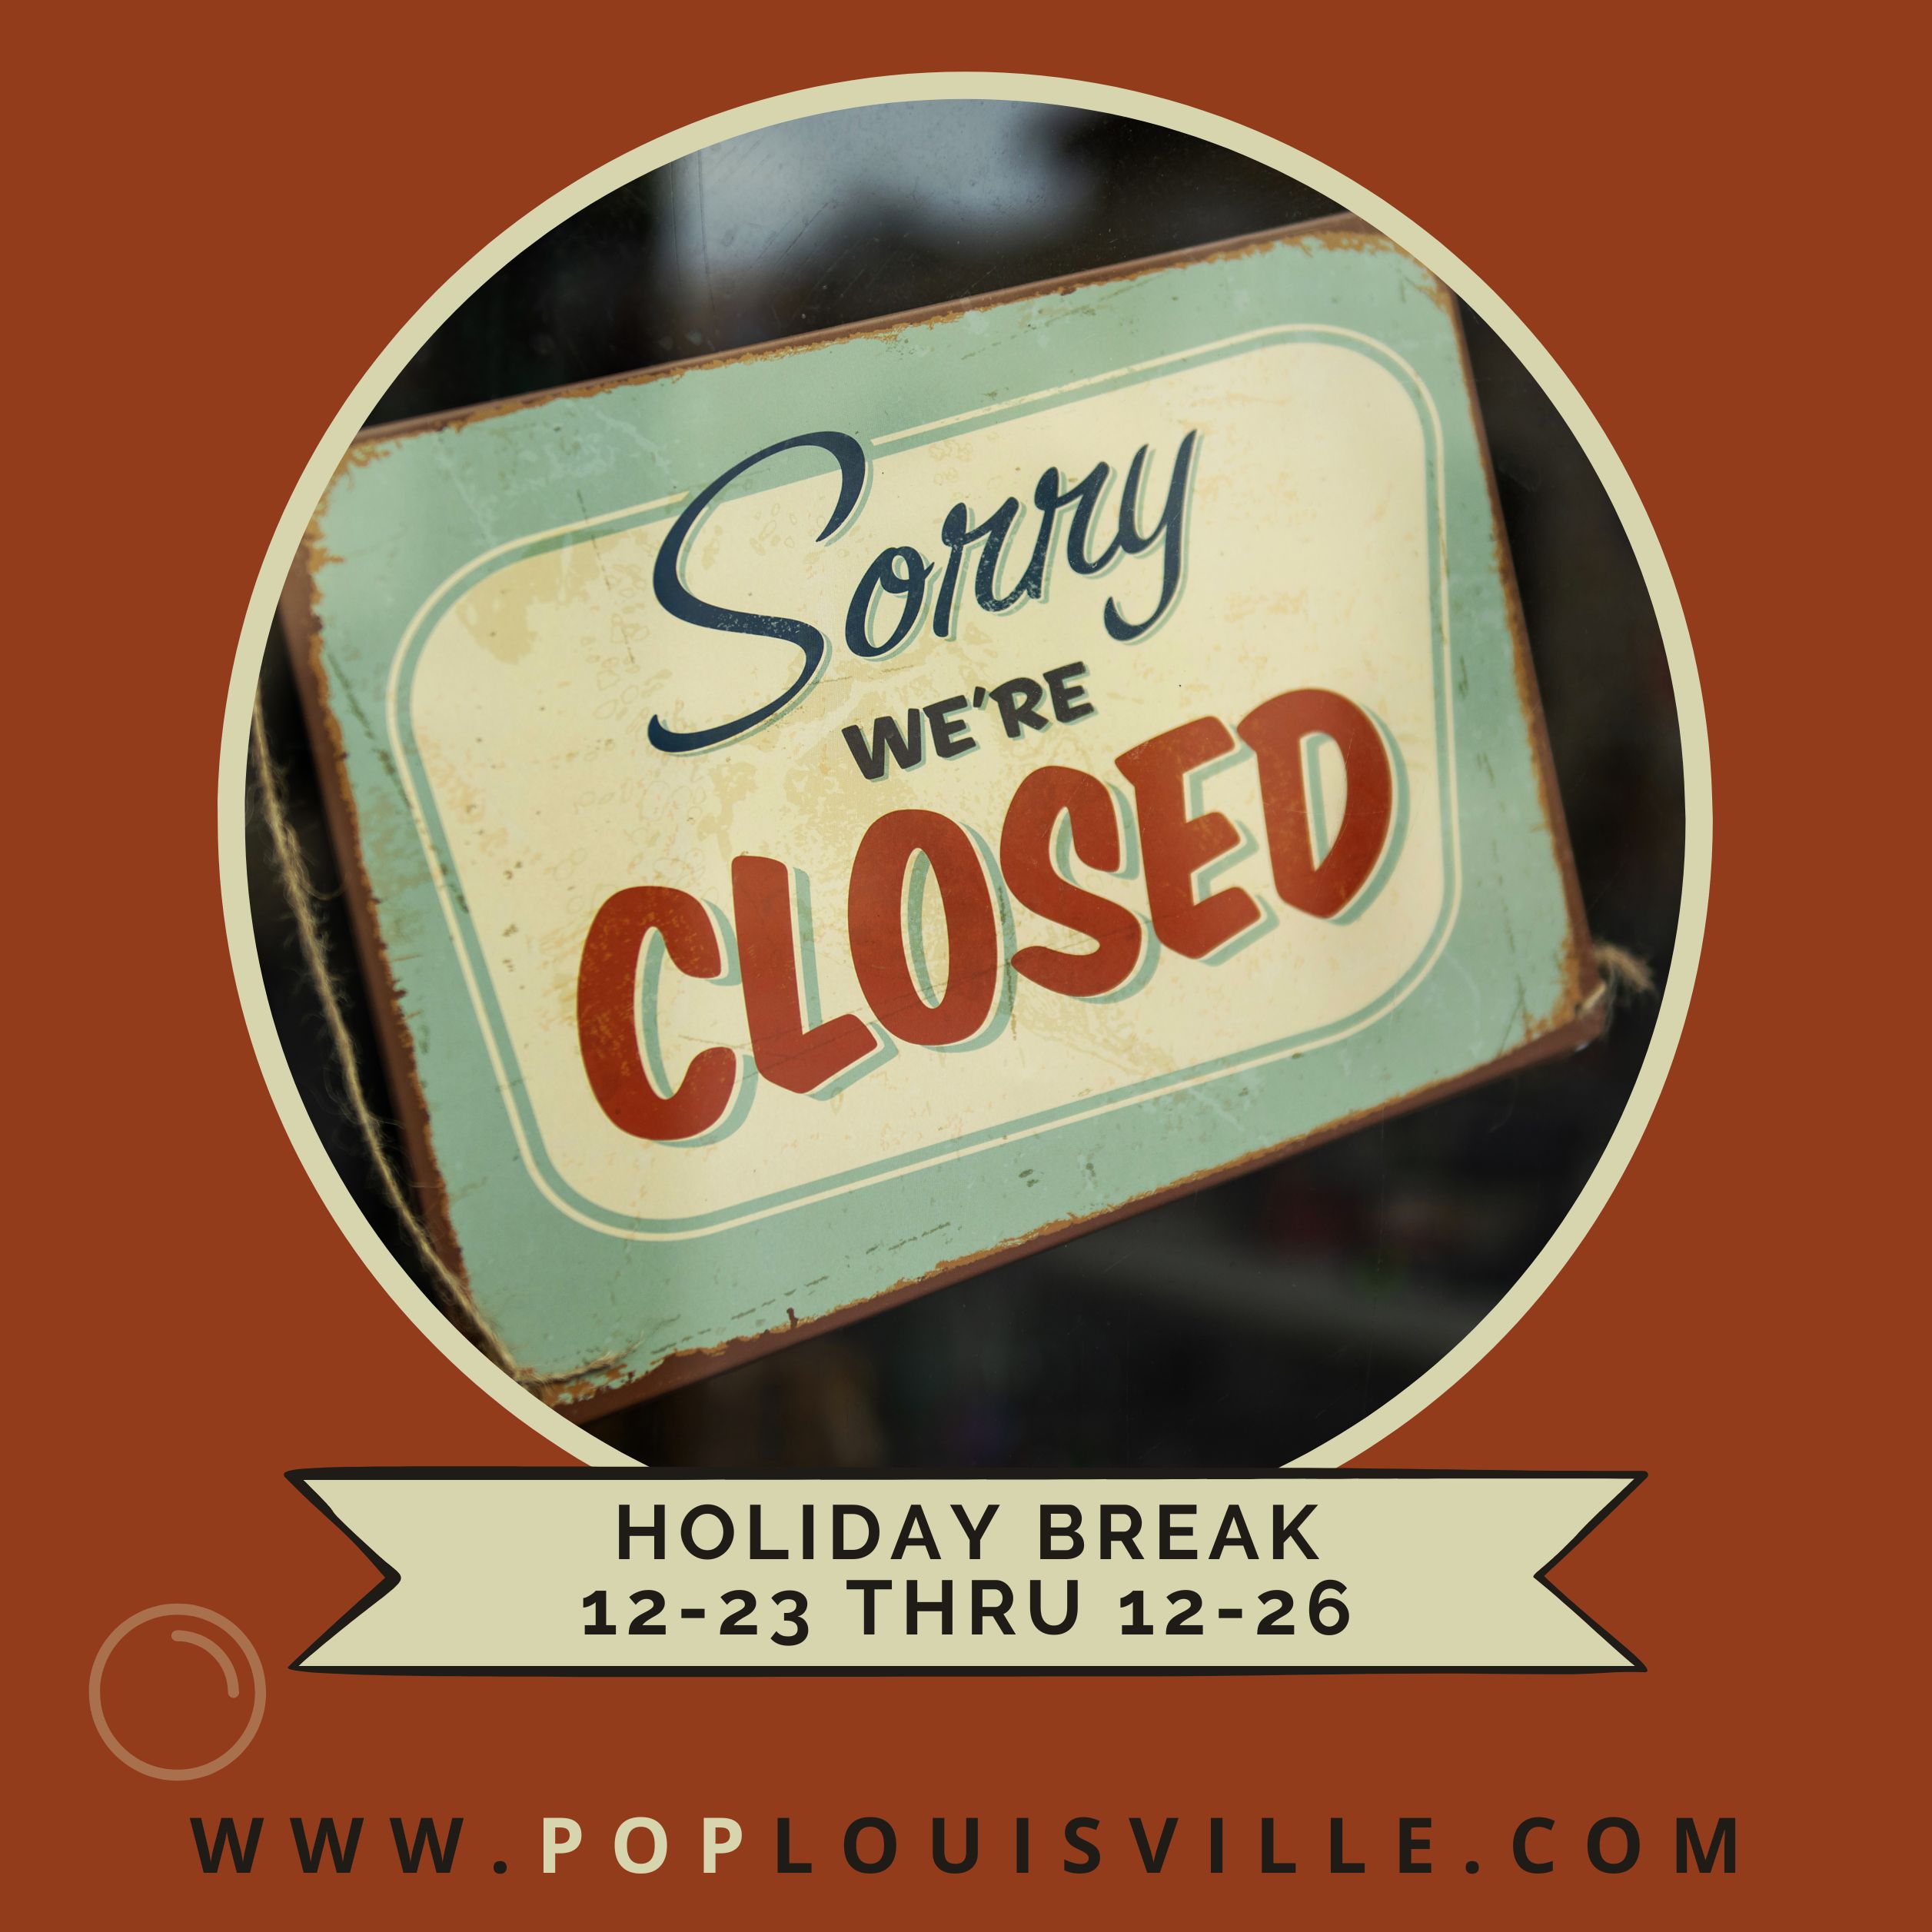 Closed for Holiday Break